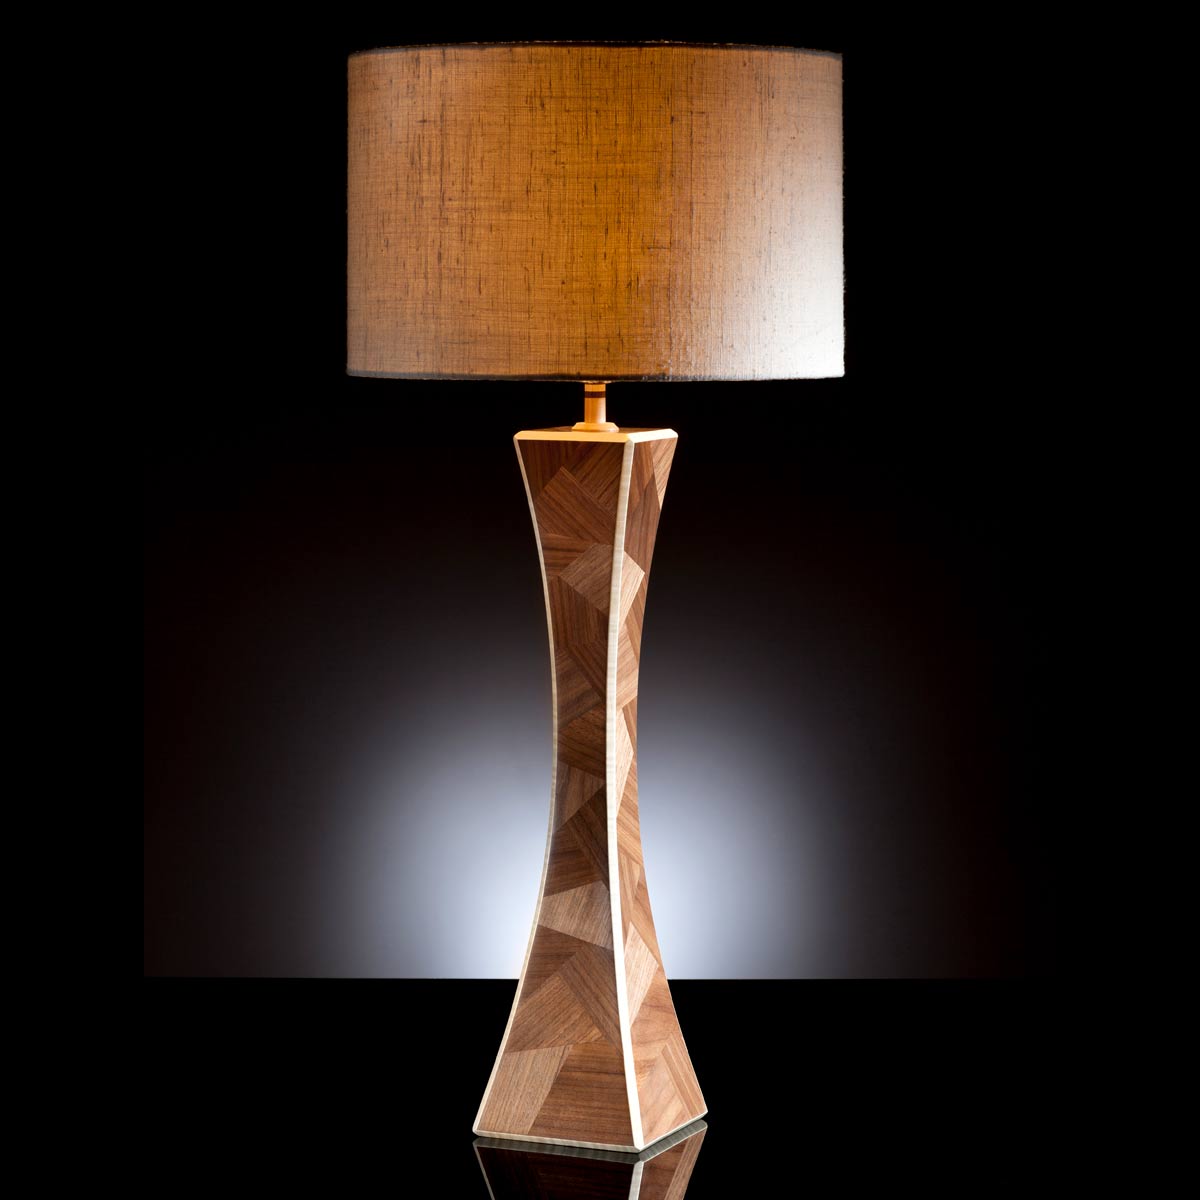 Artisan Abstract table lamp made by Storm Furniture and sold by South Charlotte Fine Lighting